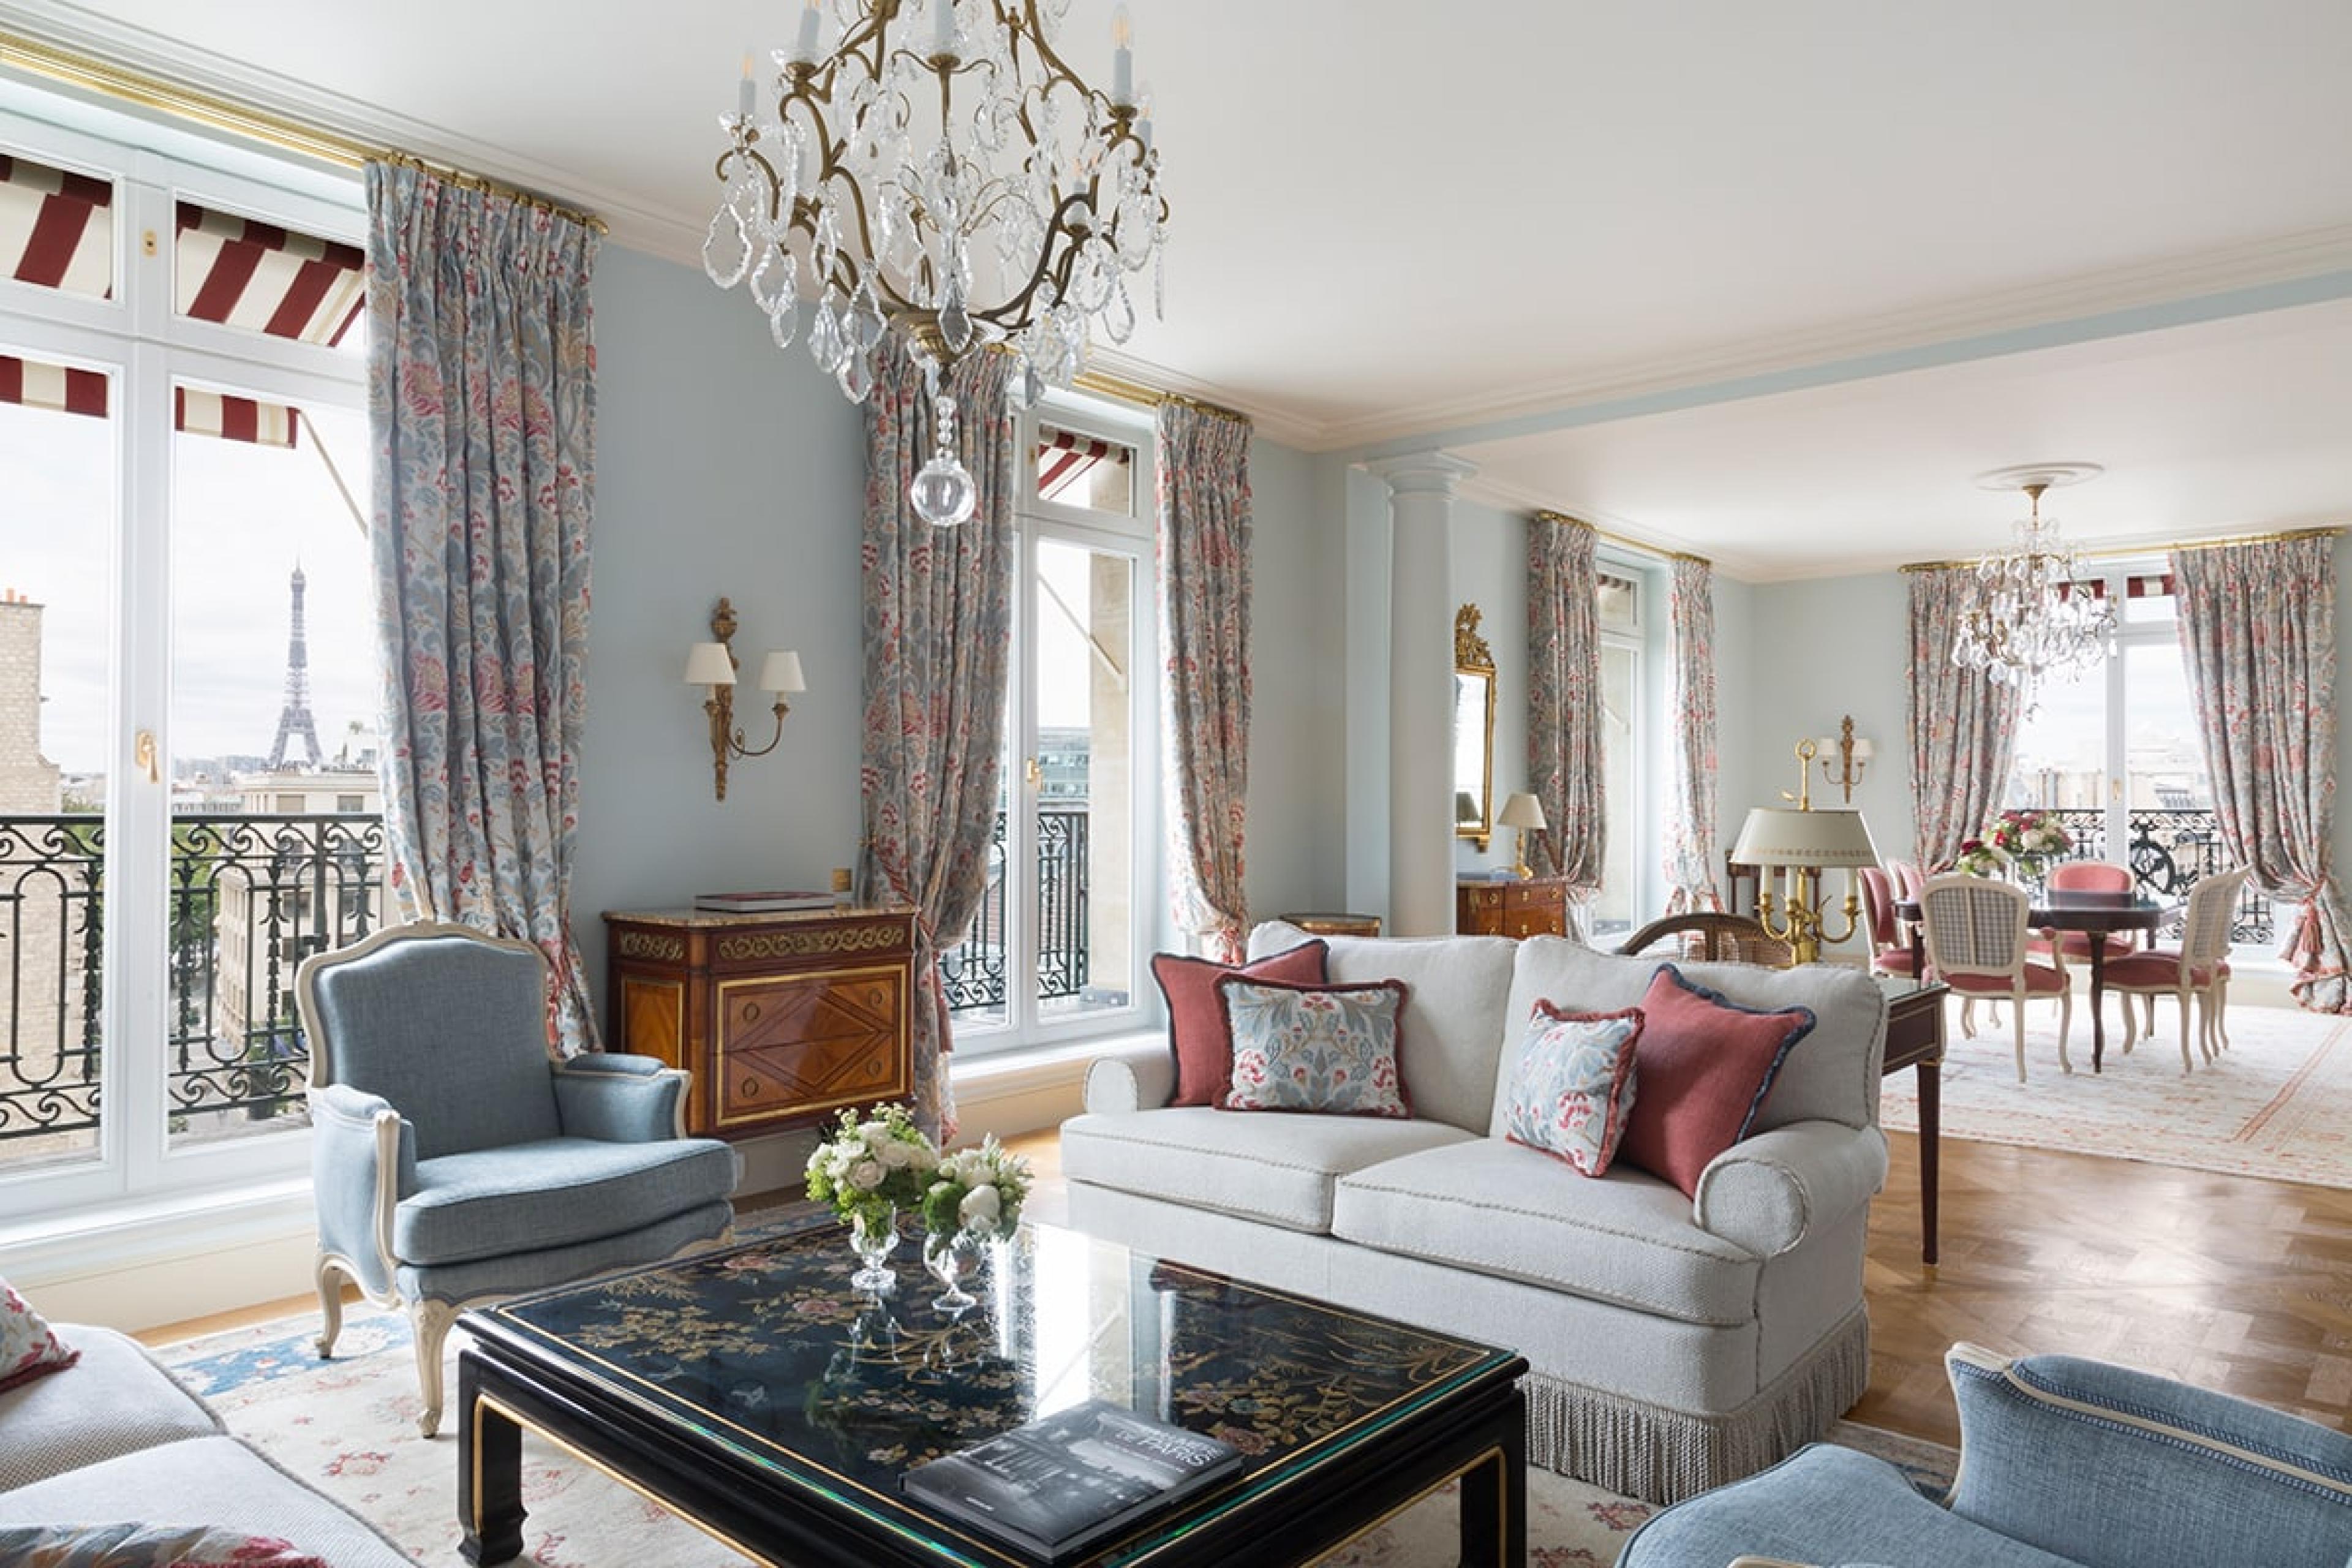 hotel suite in paris with traditional elegant furnishings, a chandelier, and windows with view of eiffel tower